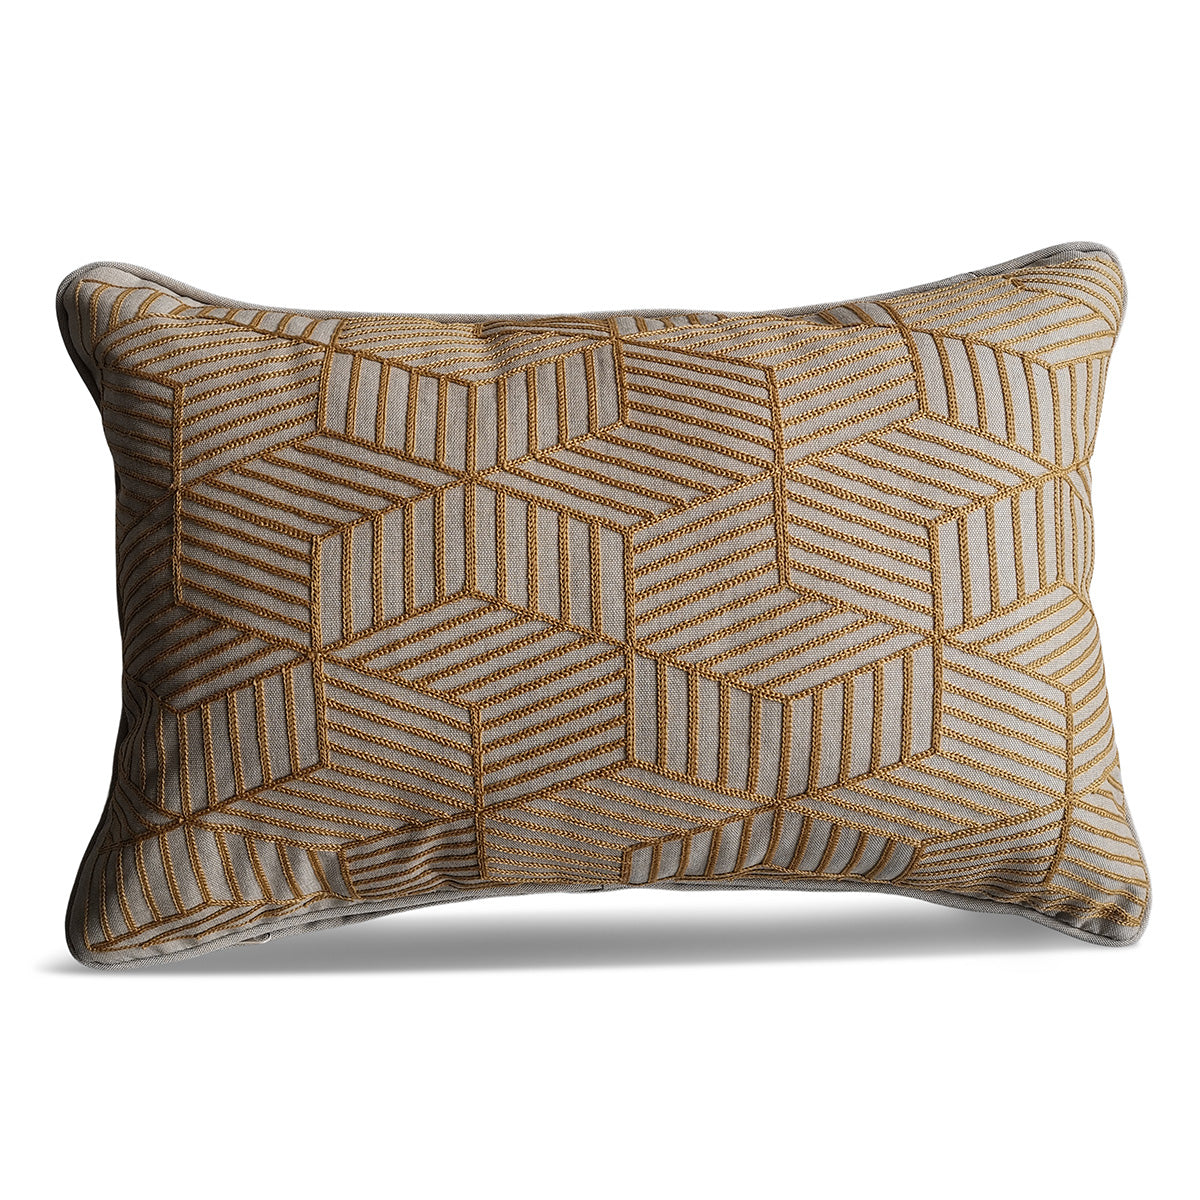 LG | Deluxe Gold Striped Cube Scatter Cushion - 40cm x 60cm